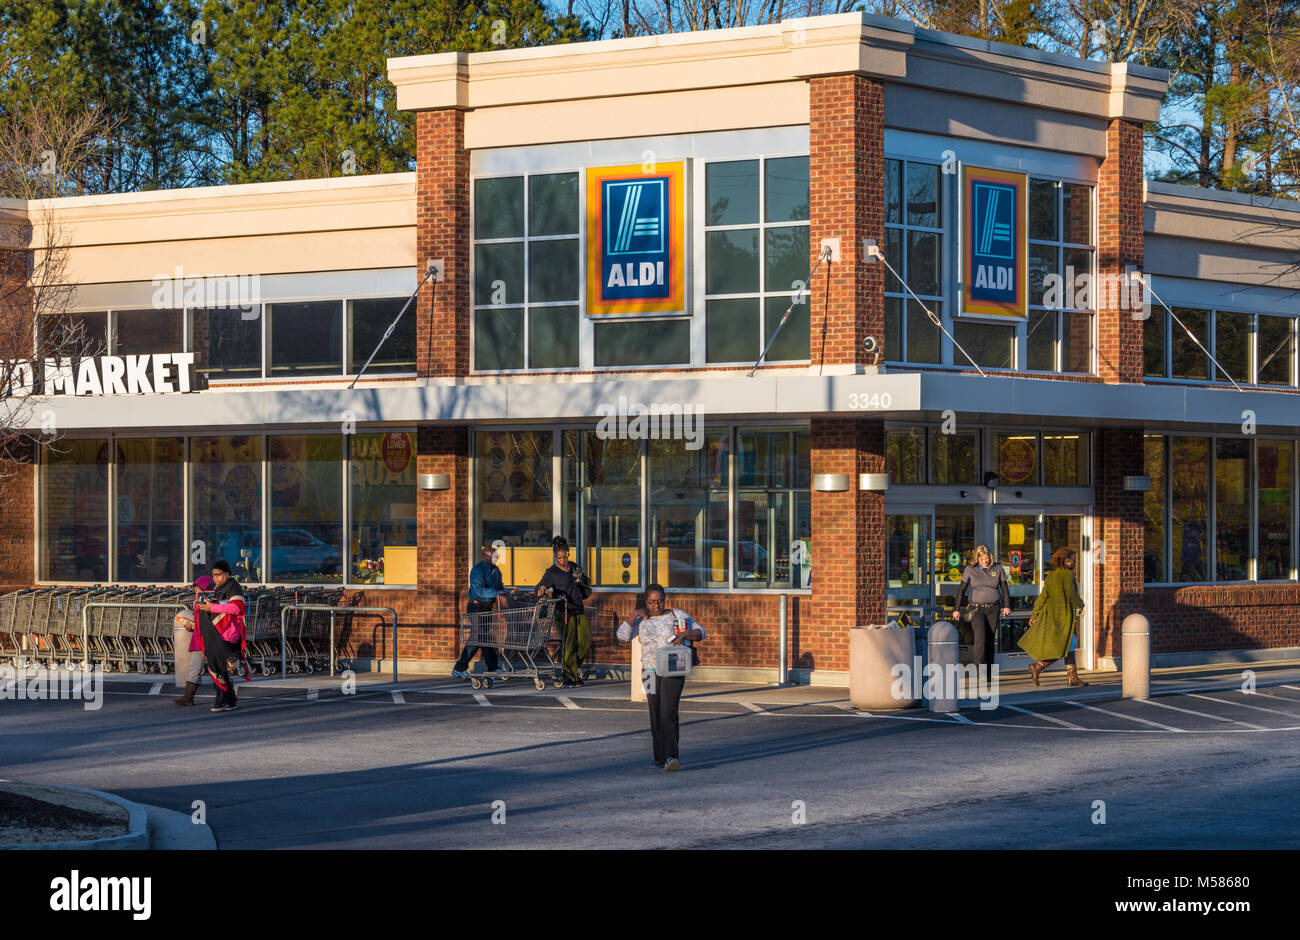 ALDI store in Metro Atlanta, Georgia is part of the international discount supermarket chain based in Germany with over 10,000 stores in 18 countries. Stock Photo